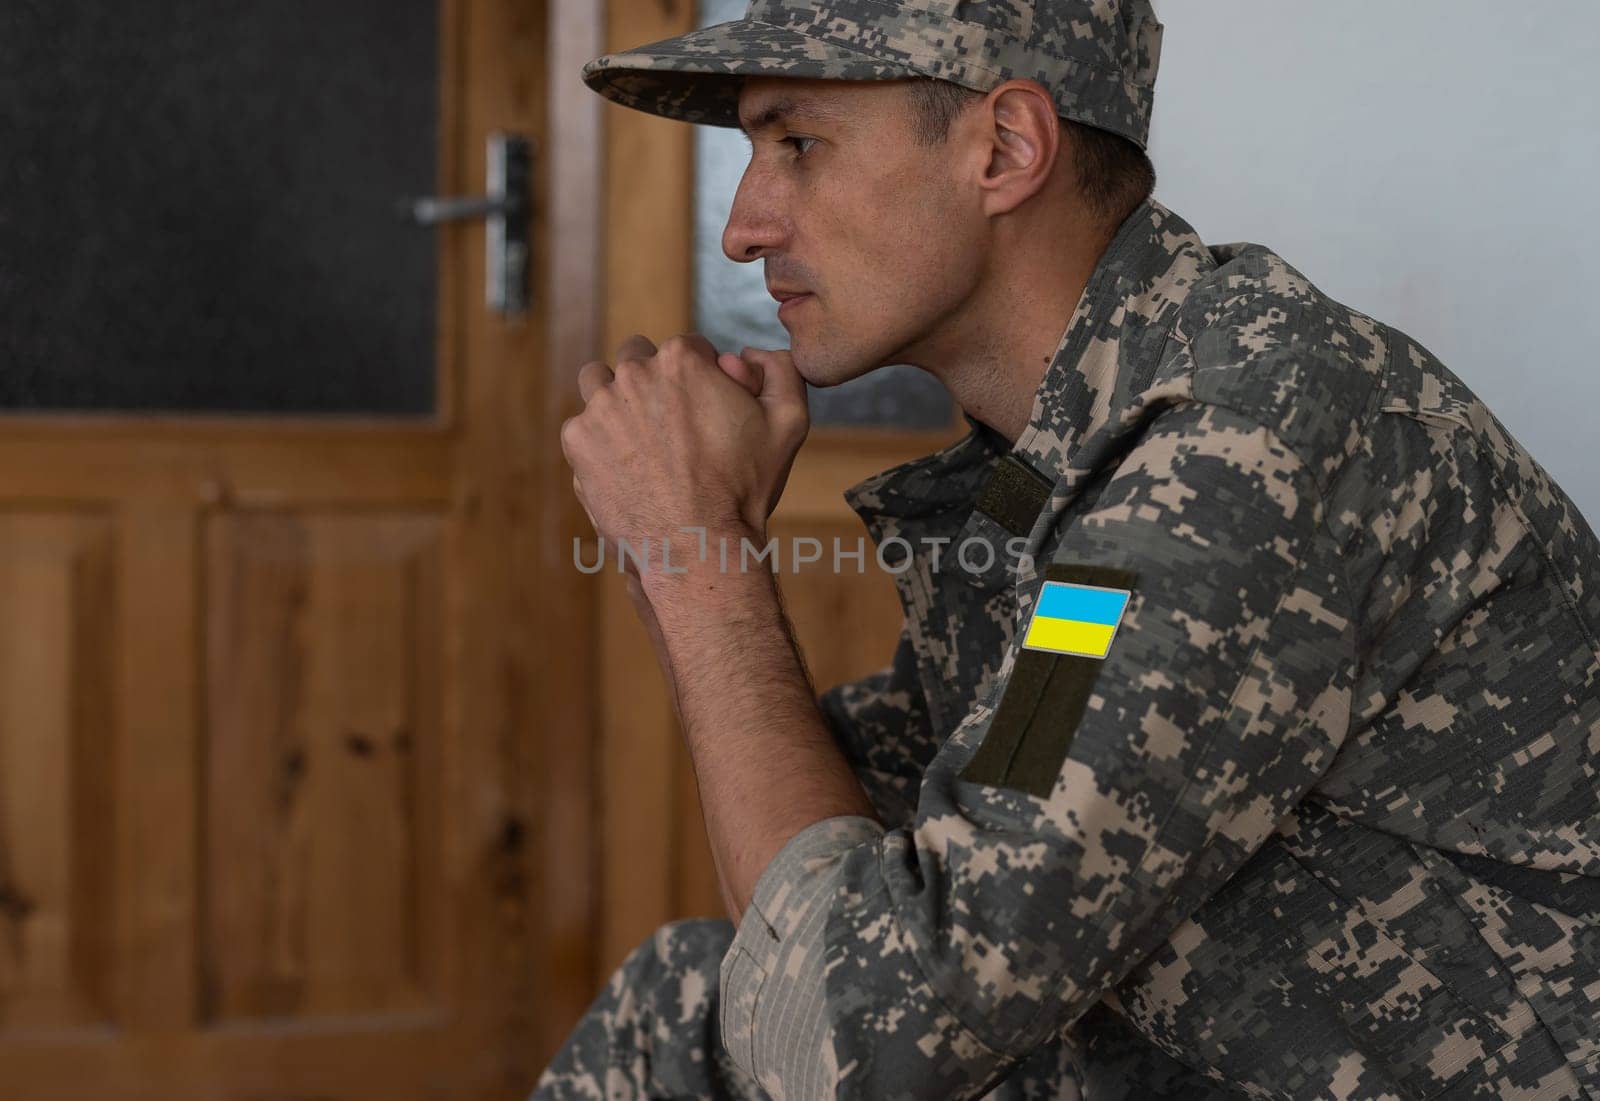 Ukrainian soldier wearing military uniform with flag and chevron depicting trident - Ukrainian national symbol flag by Andelov13